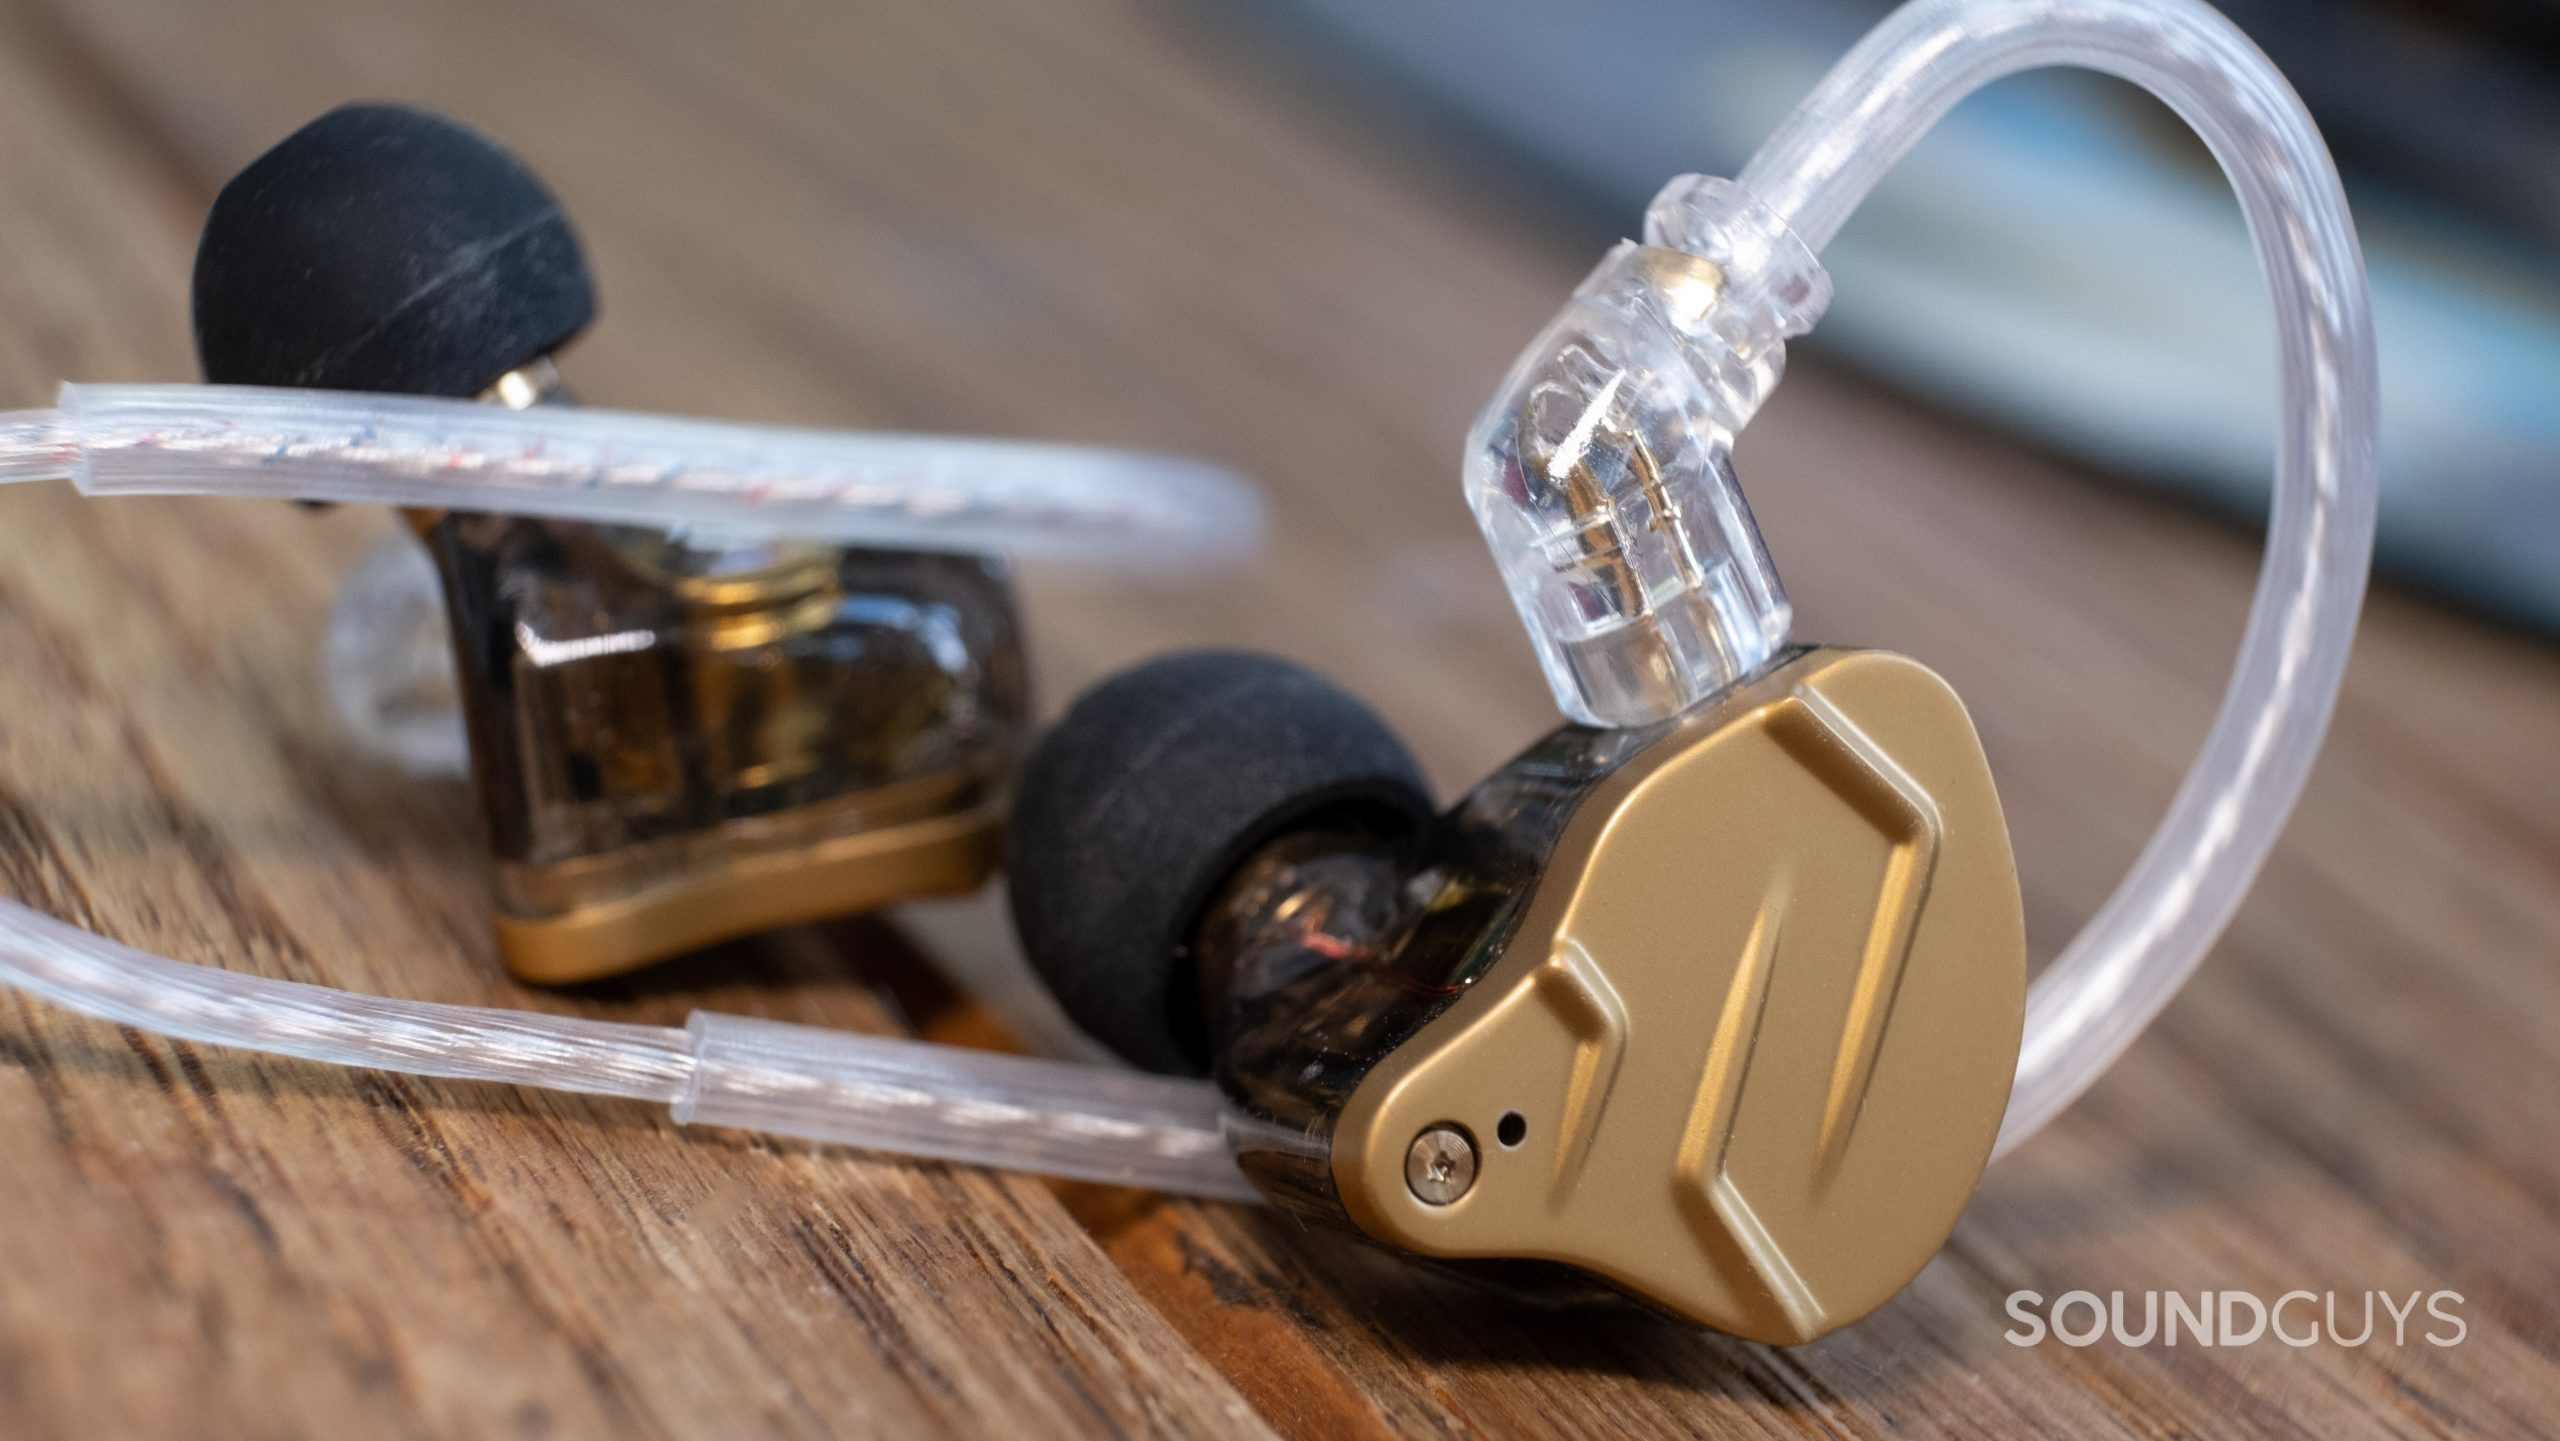 KZ ZSN Pro X Wired Earphones Review: Audiophile Sound on a Budget